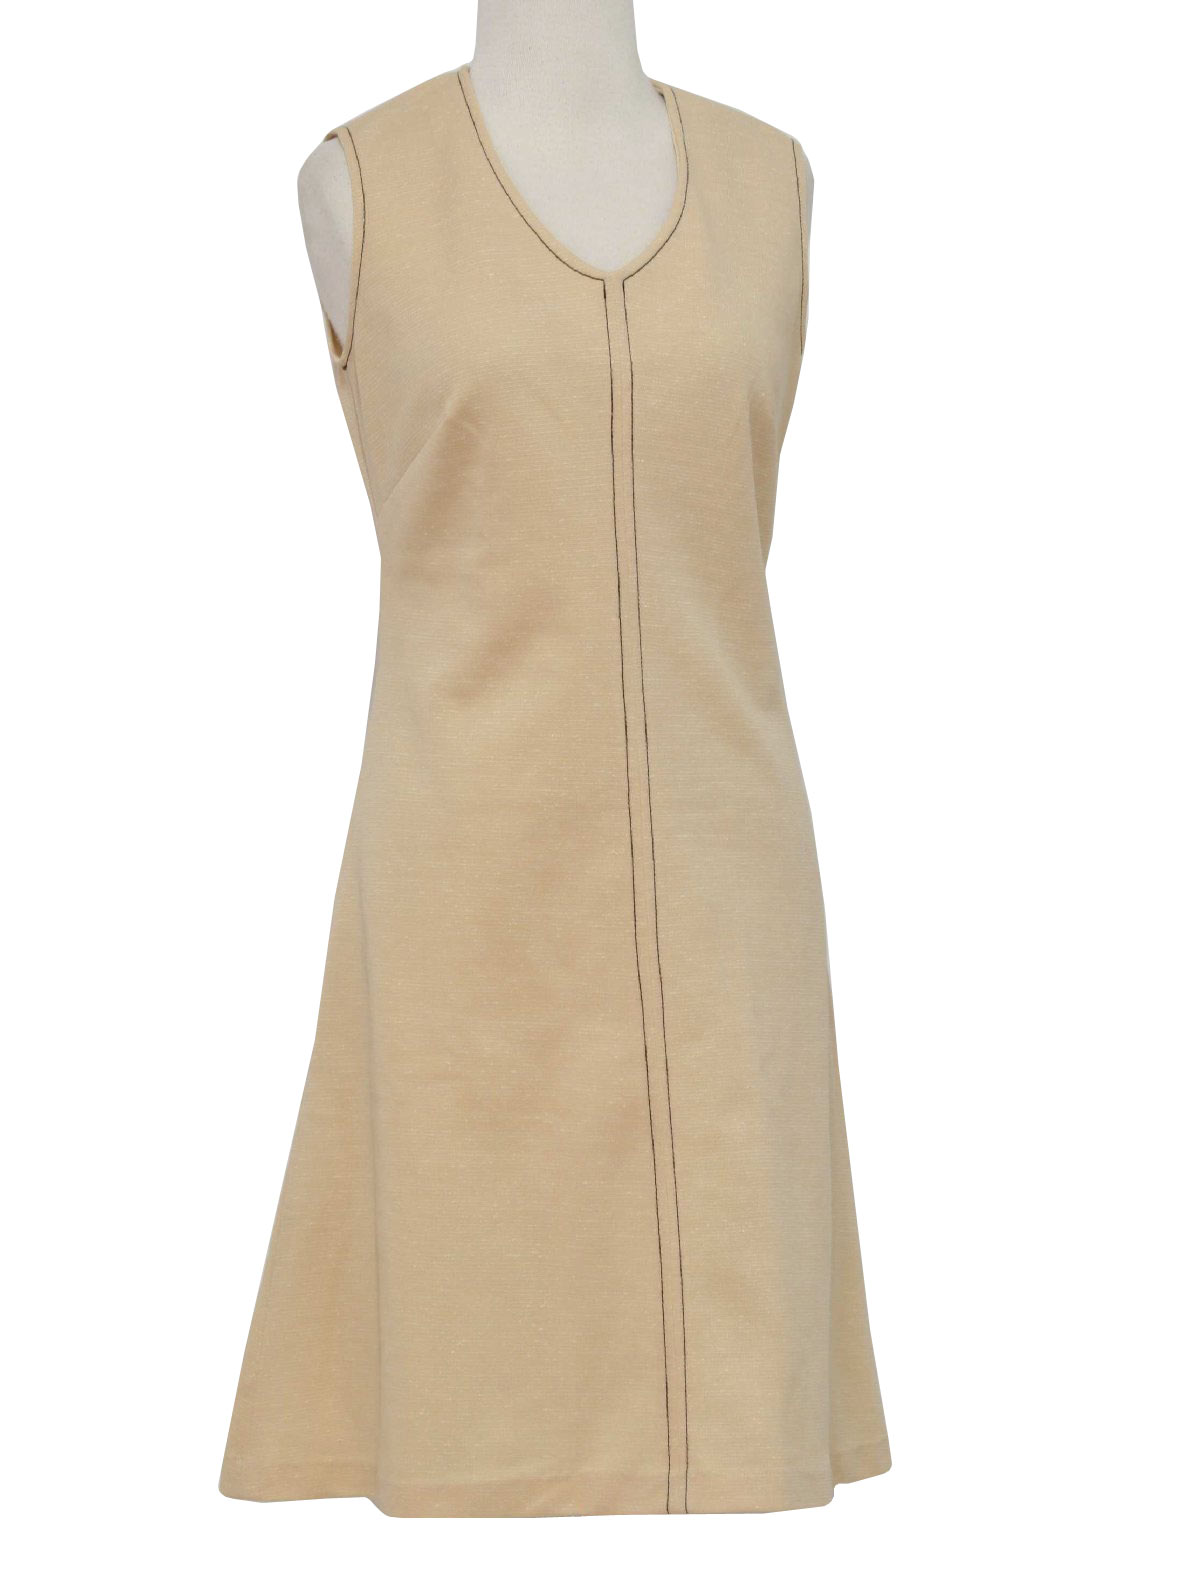 1970's Vintage Dress: 70s -no label- Womens sand polyester sleeveless ...